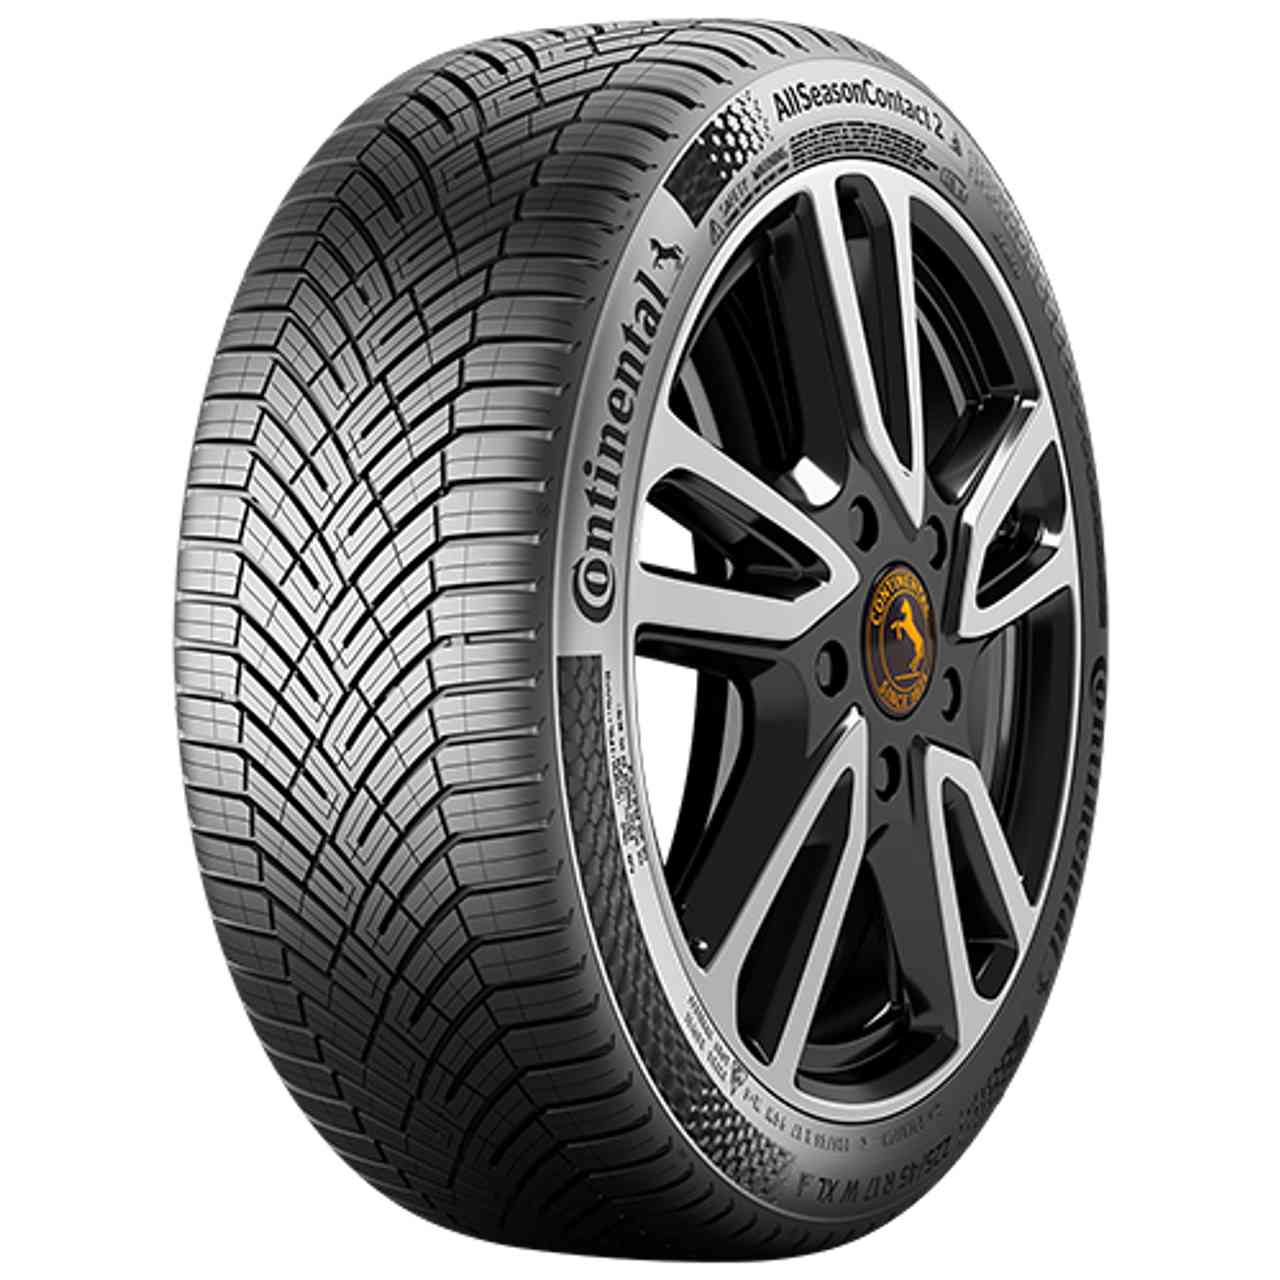 CONTINENTAL ALLSEASONCONTACT 2 (EVc) 205/55R17 95V BSW XL